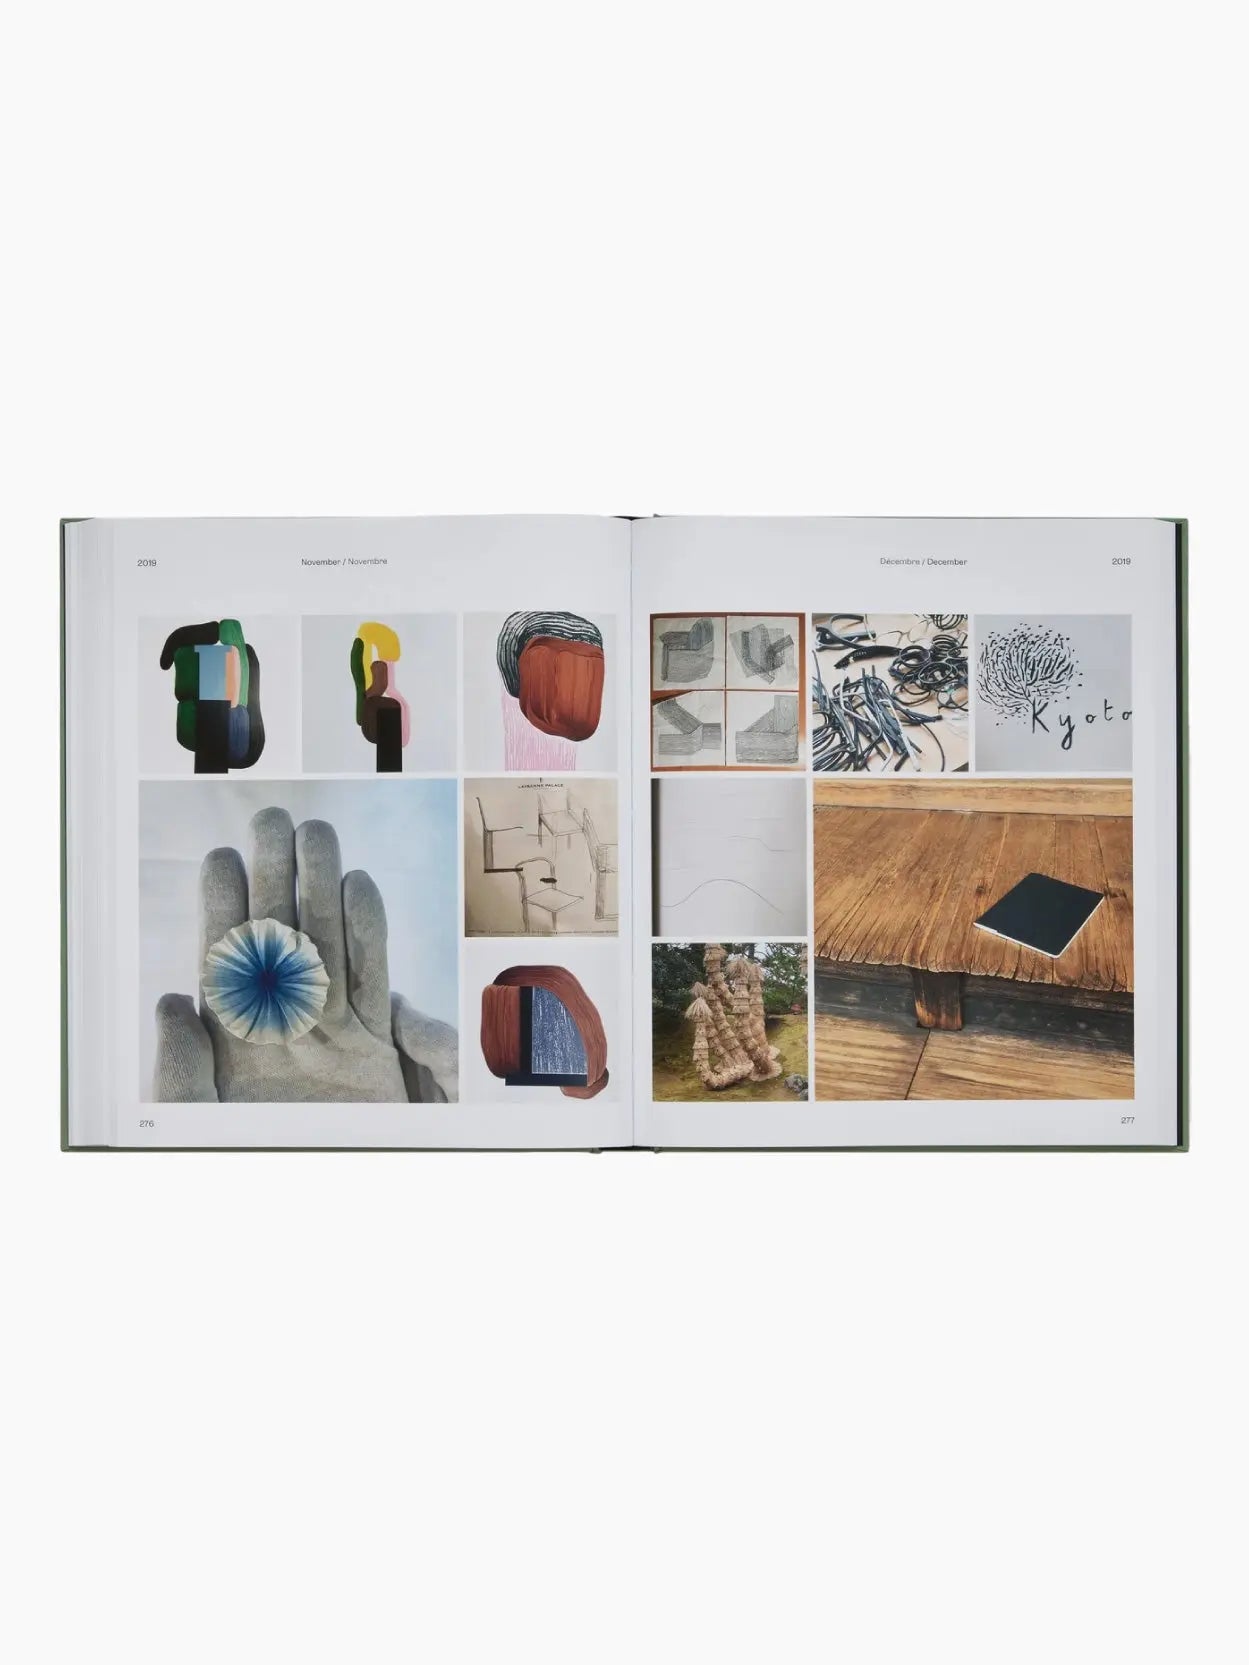 Ronan Bouroullec: Day After Day Phaidon